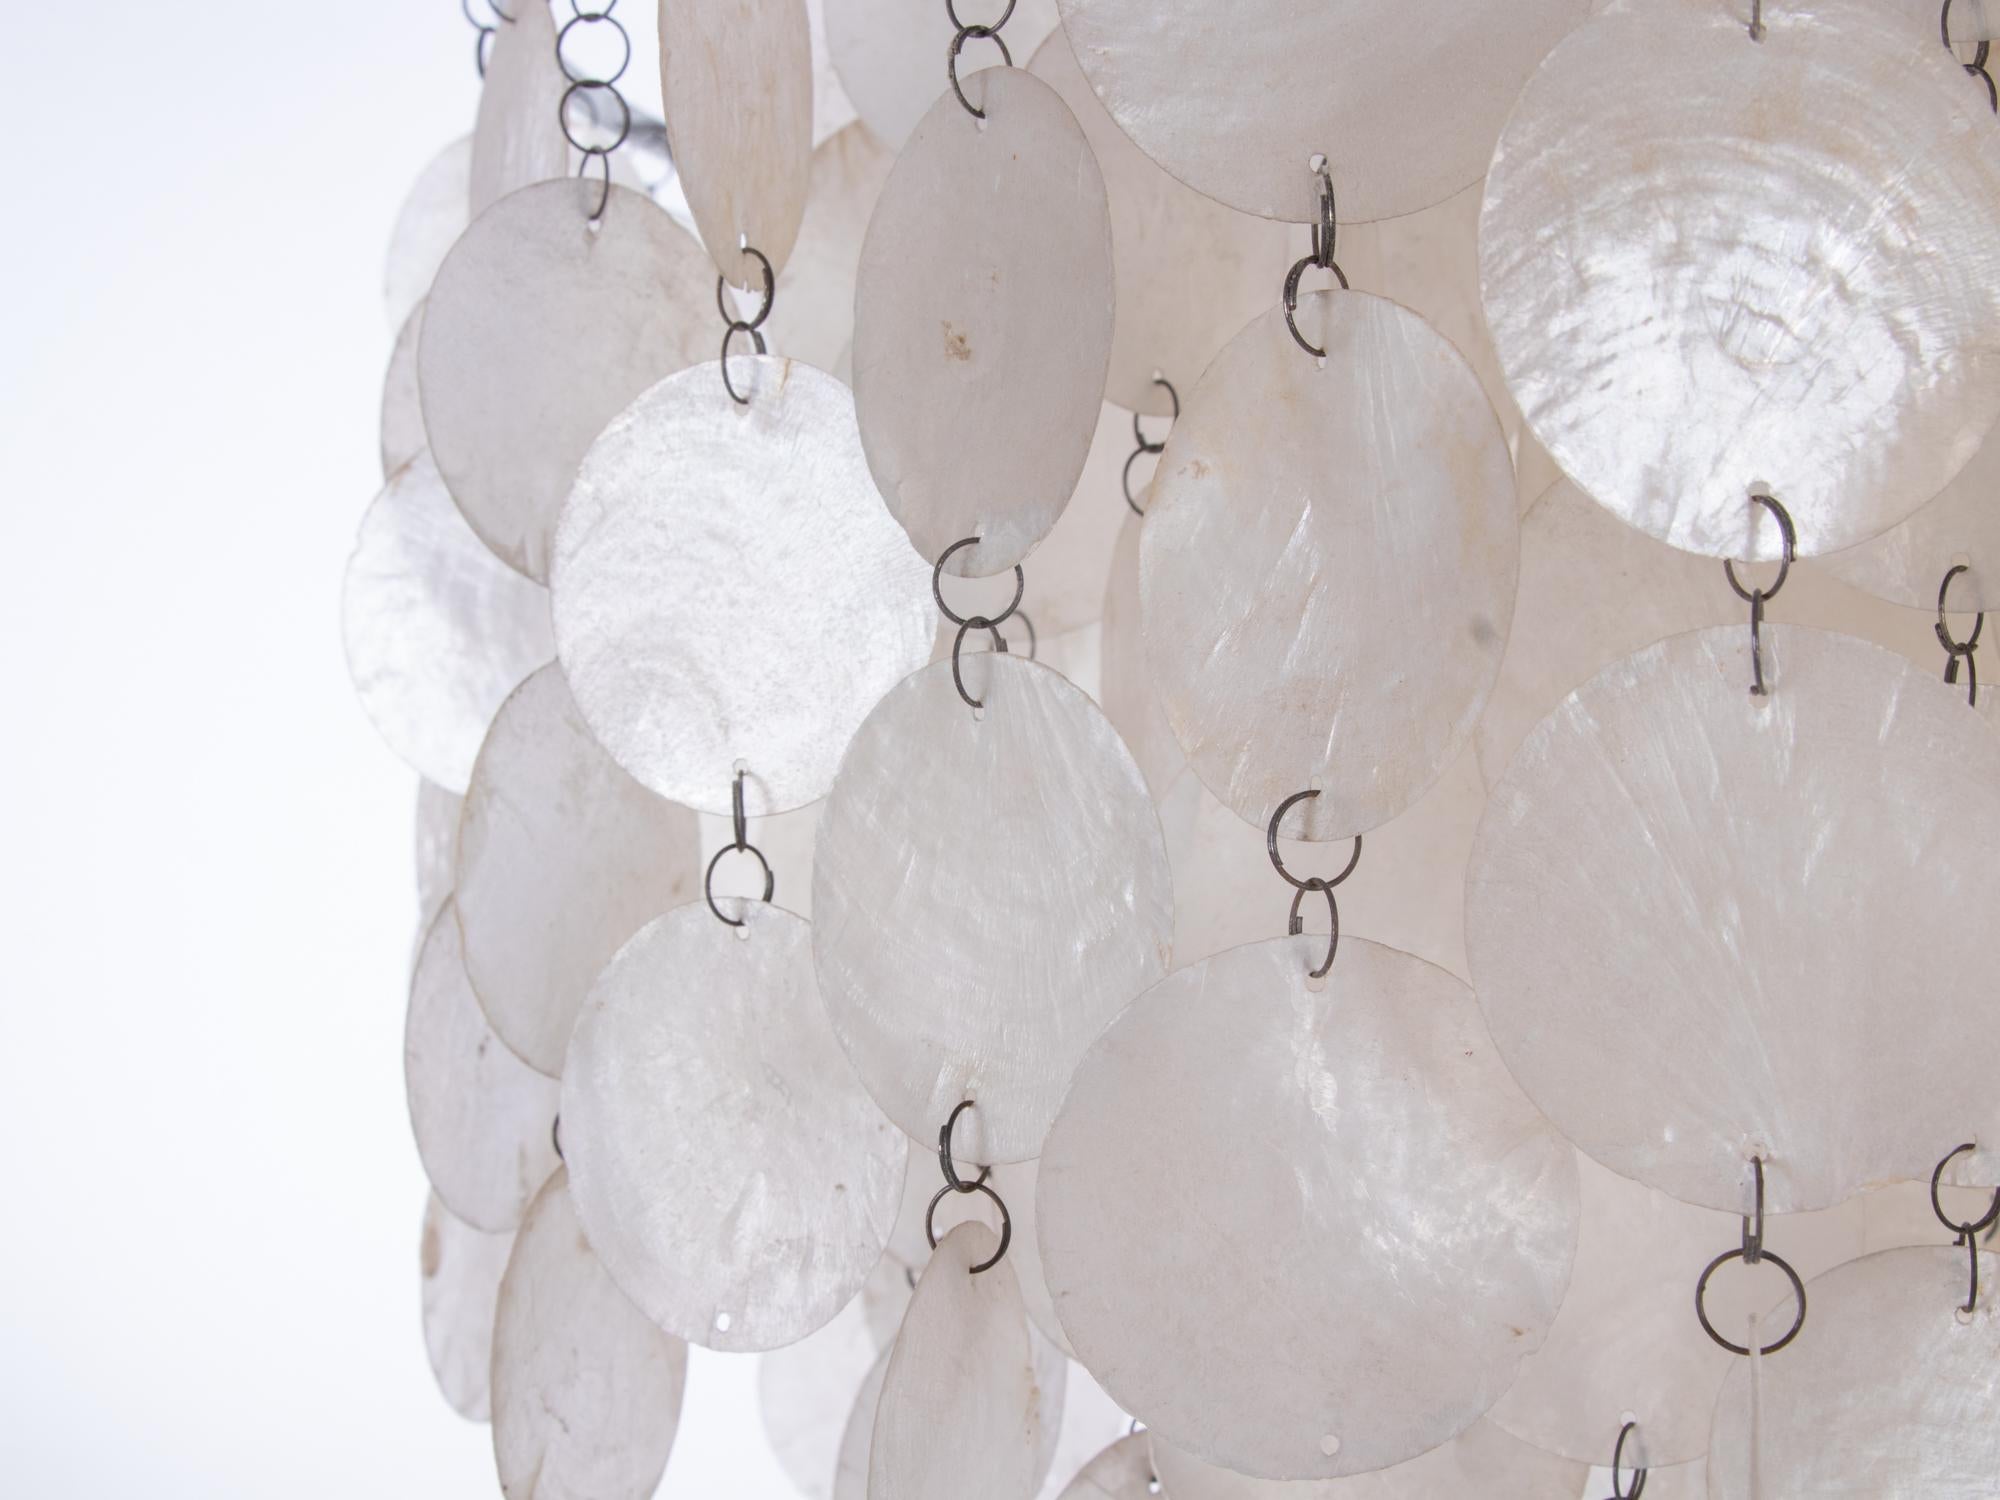 Mid-20th Century '1 of 3' Fun Shell Chandelier by Verner Panton for J. Luber Ag, Switzerland 1964 For Sale